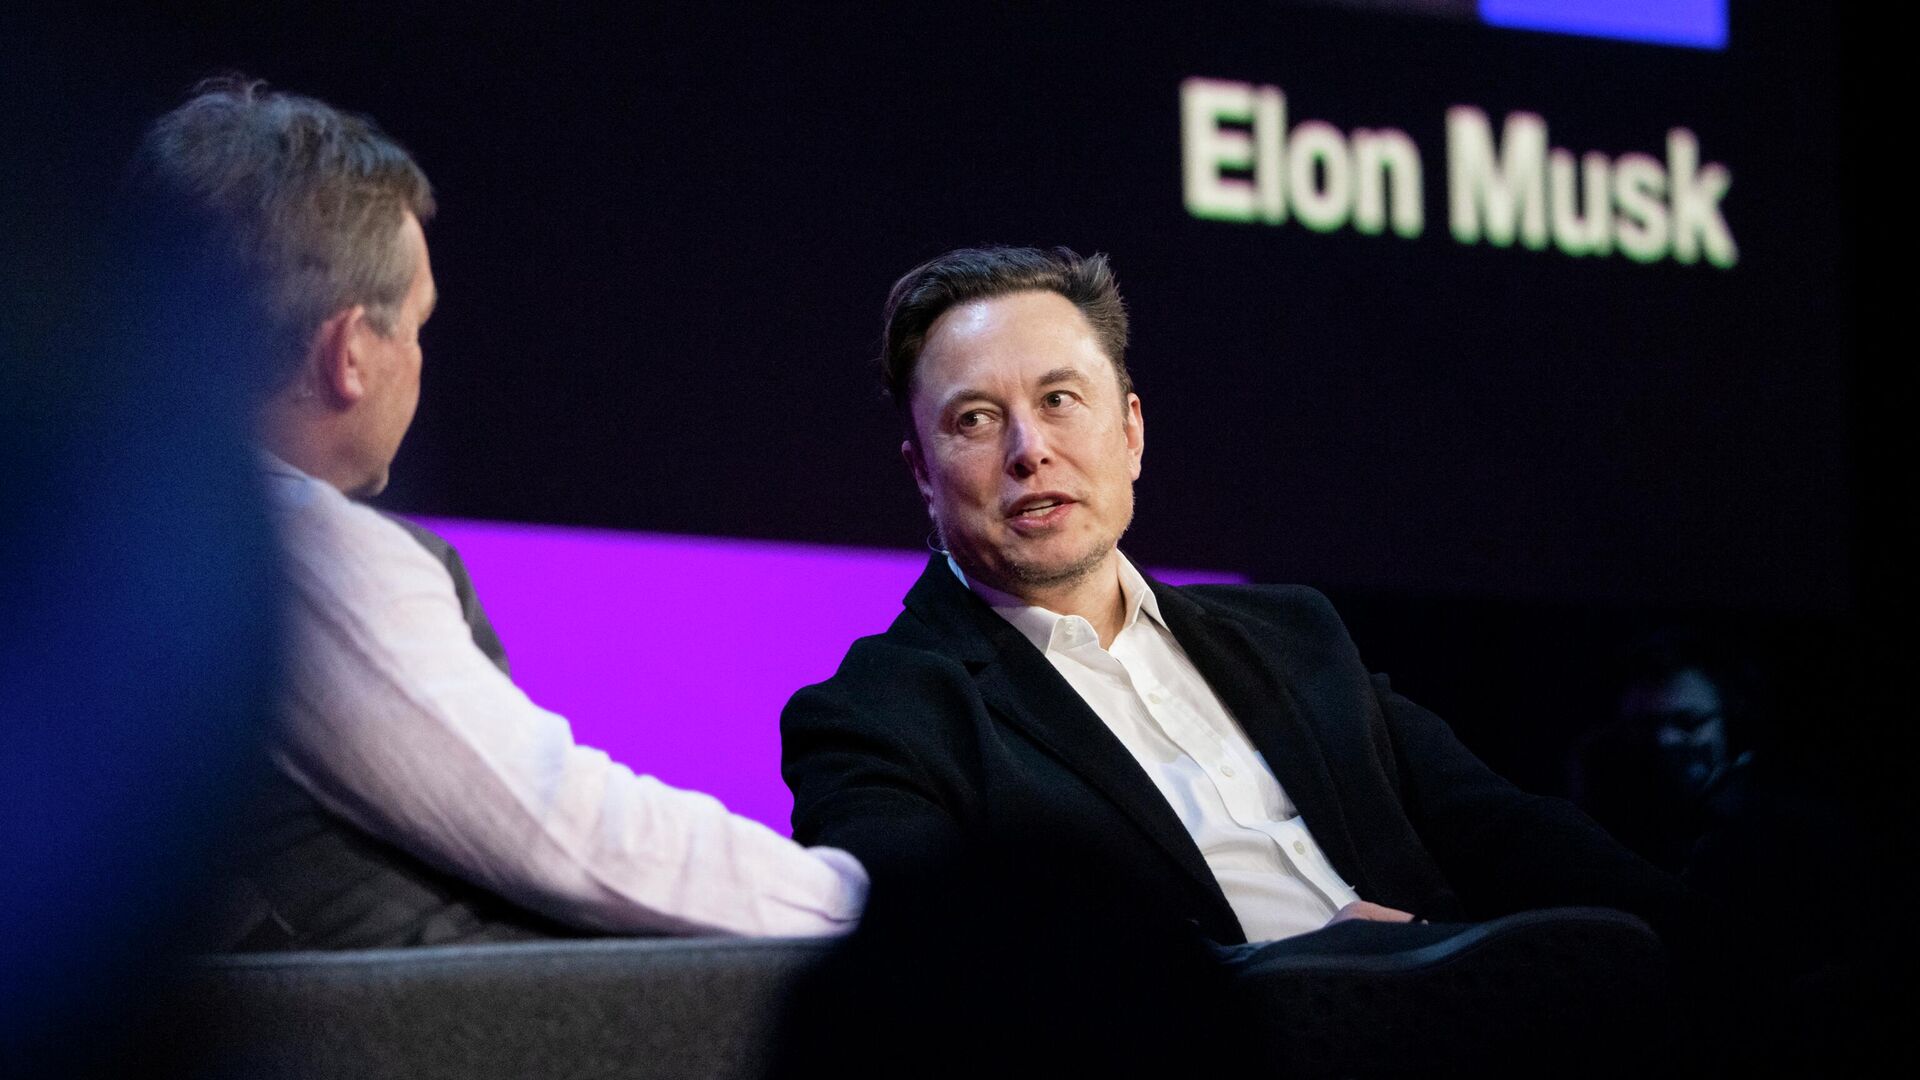 This handout image released by TED Conferences shows Tesla chief Elon Musk (R) speaking with head of TED Chris Anderson at the TED2022: A New Era conference in Vancouver, Canada, April 14, 2022. - Sputnik International, 1920, 04.05.2022